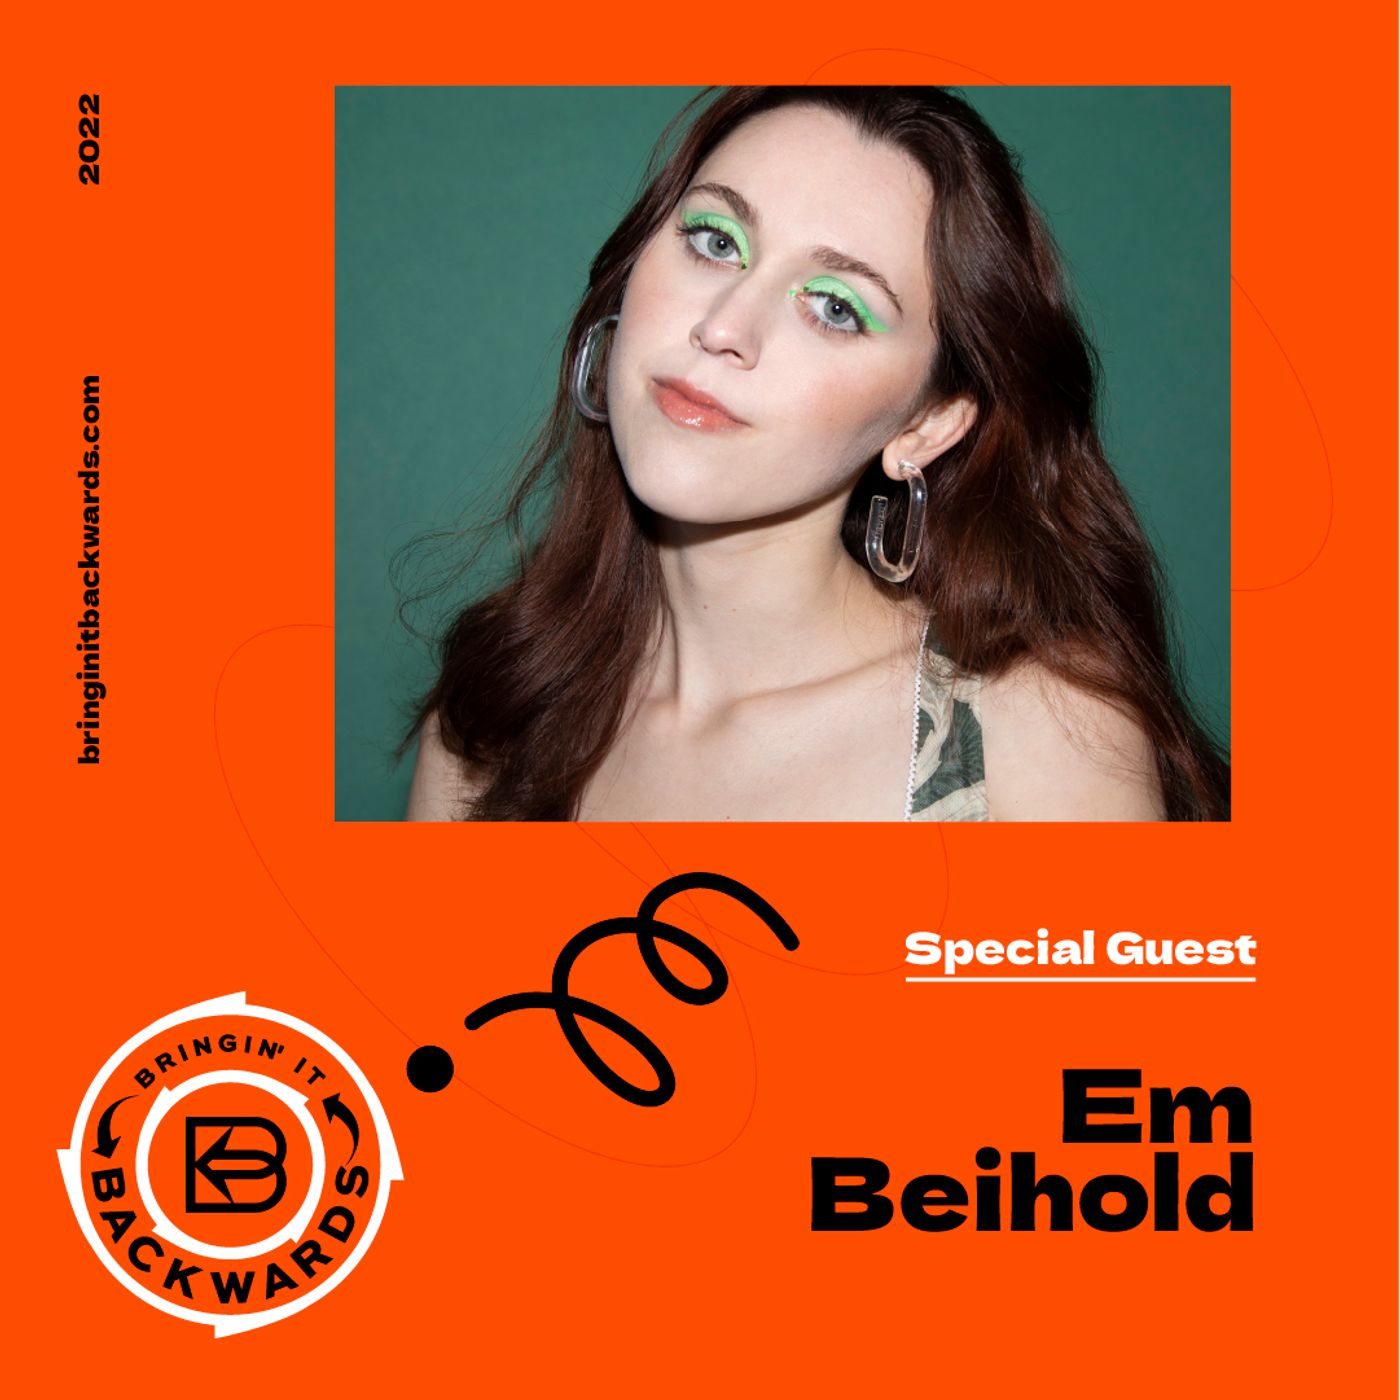 Interview with Em Beihold